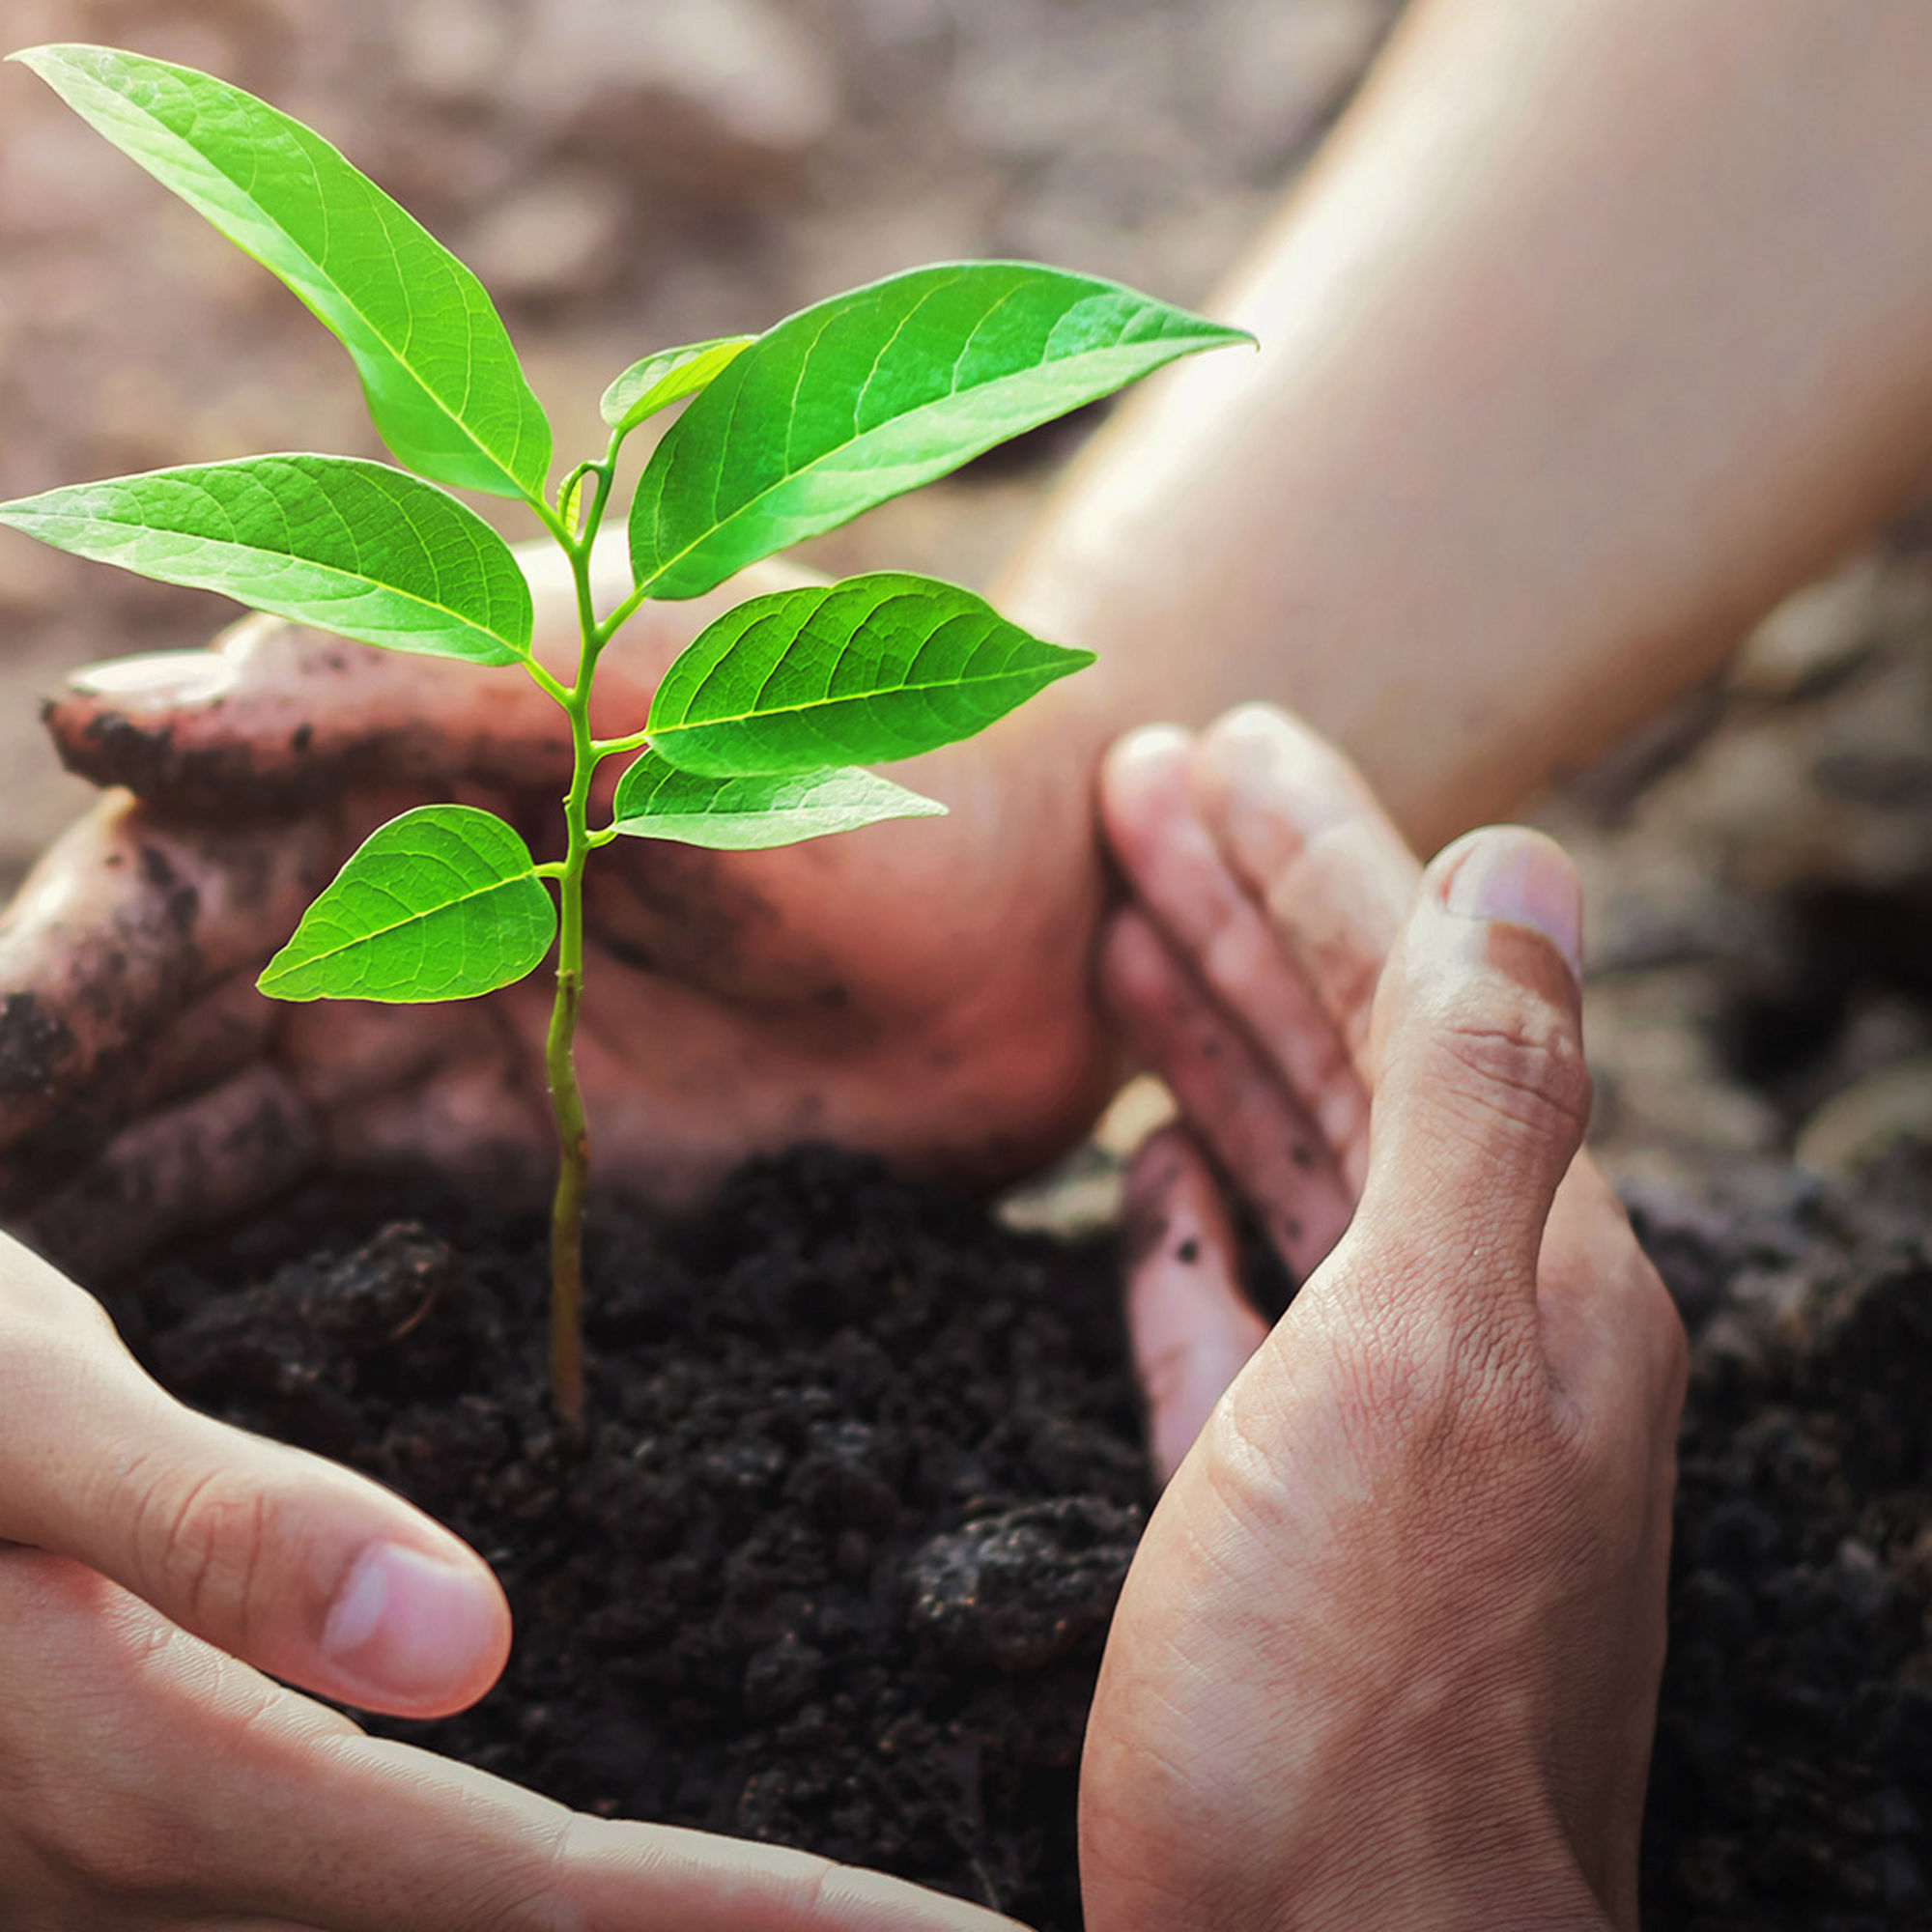 Hands planting a small plant in some rich soil